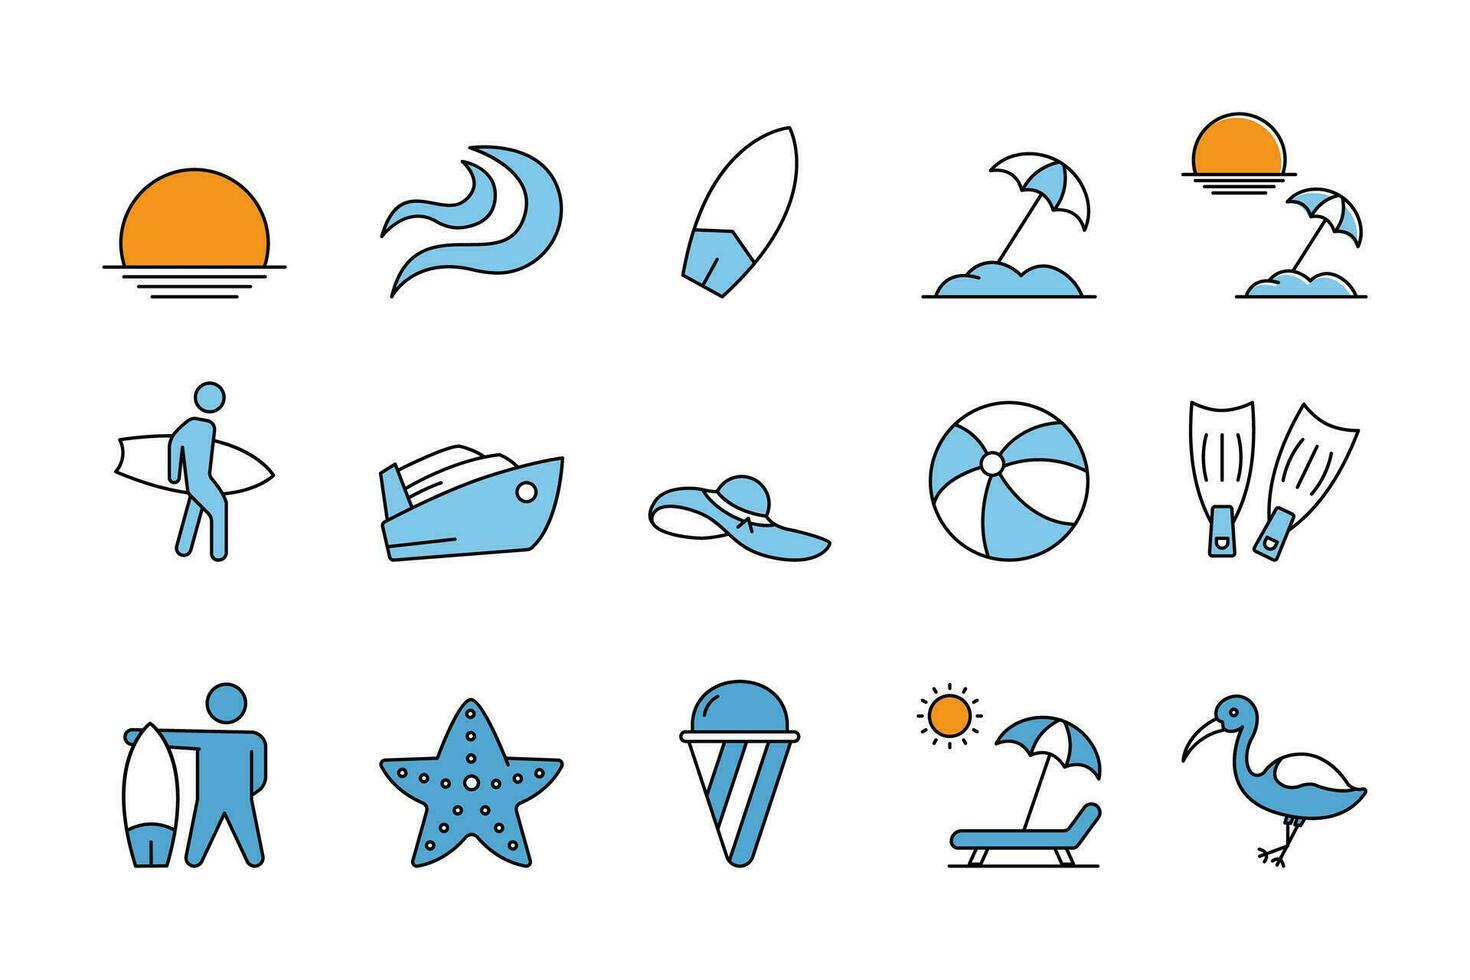 Summer set icon. Contains Sunsets icon, sunrises, waves, surfboards, beach umbrellas, surfers, sun loungers and more. Flat line icon style design. Simple vector design editable